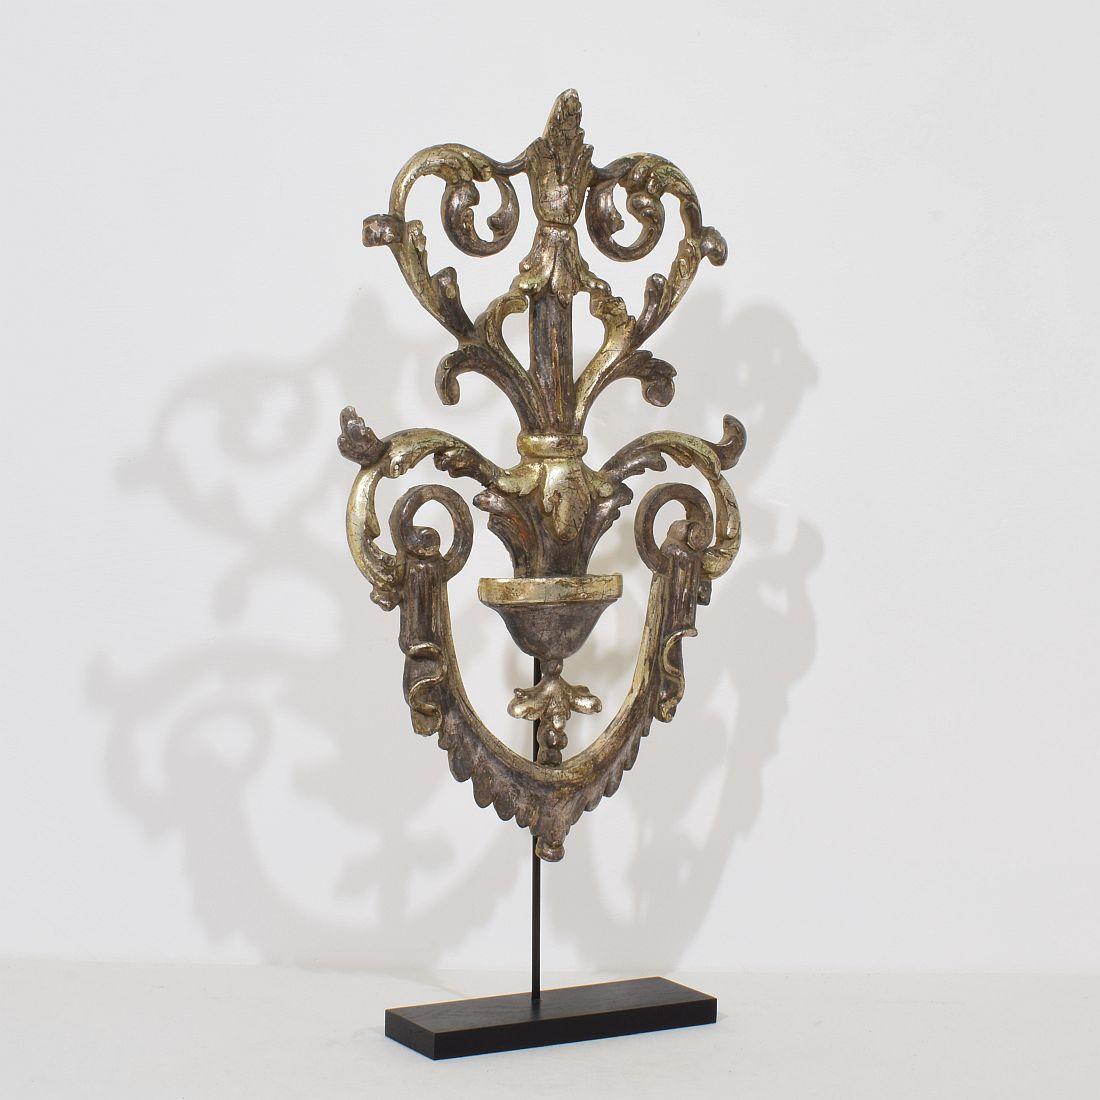 Hand-Carved 19th Century Italian Carved and Silvered Wooden Baroque Style Ornament